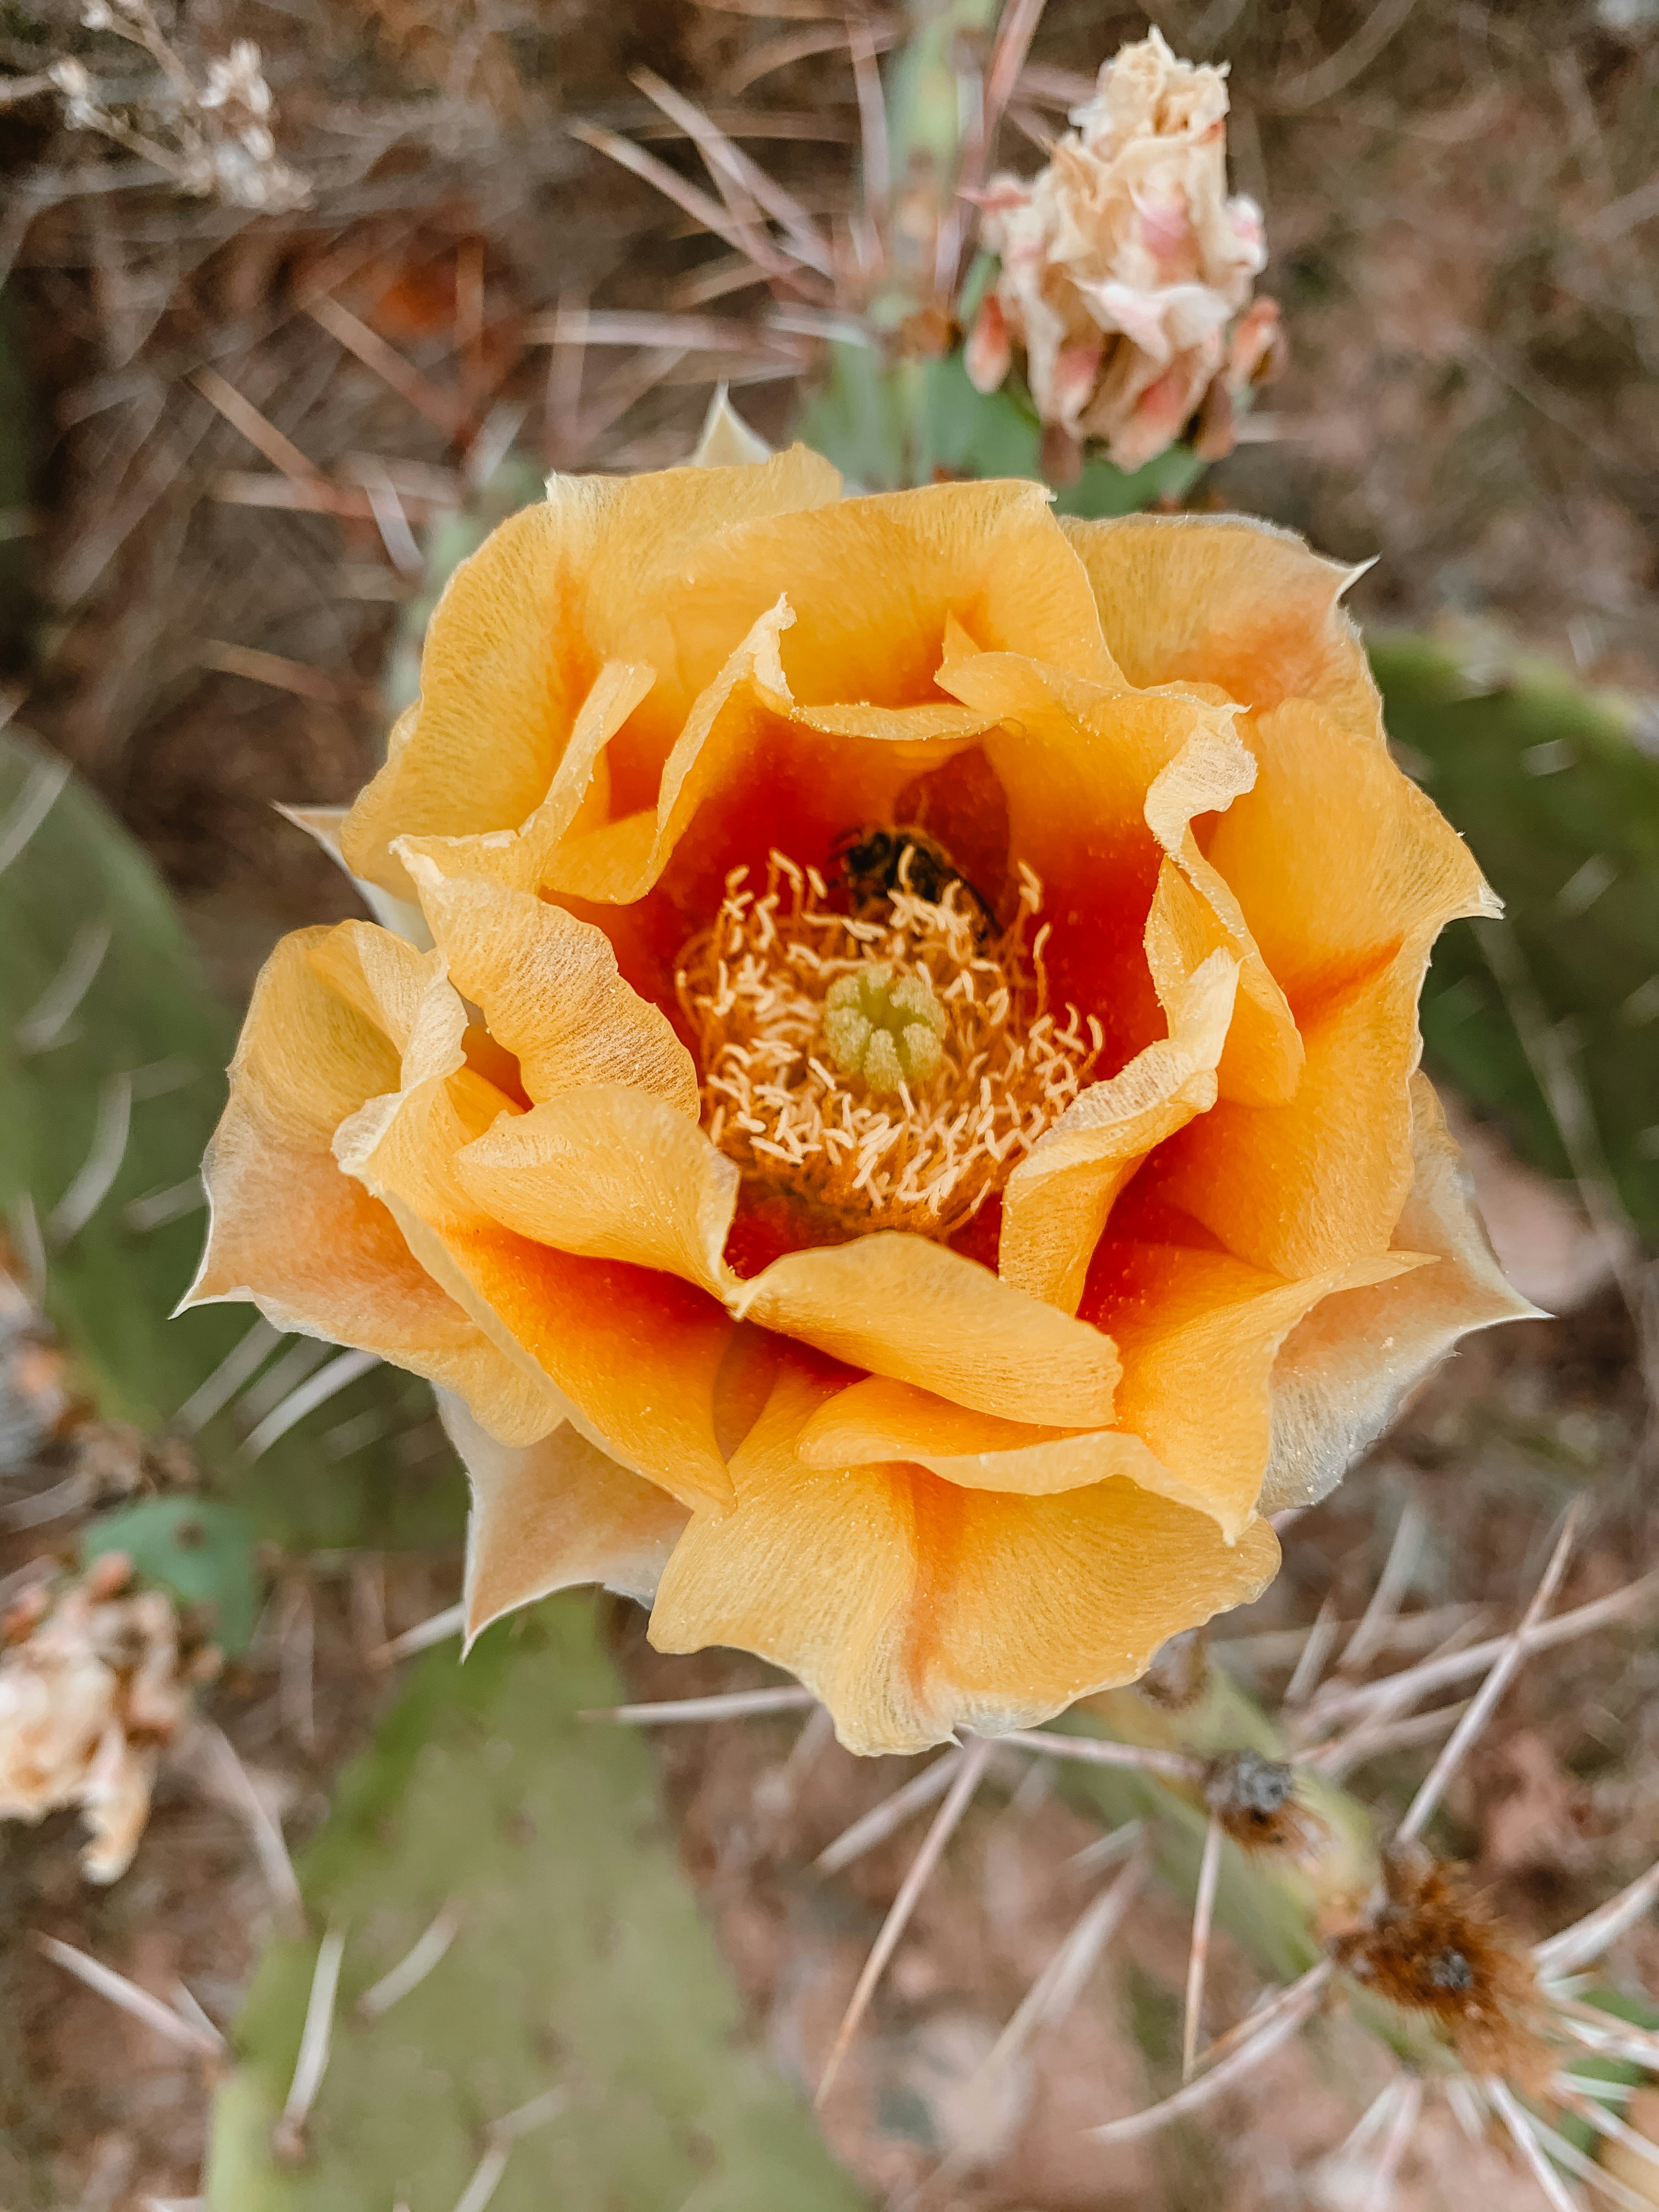 San Angelo cactus bloom by Courtney Rose